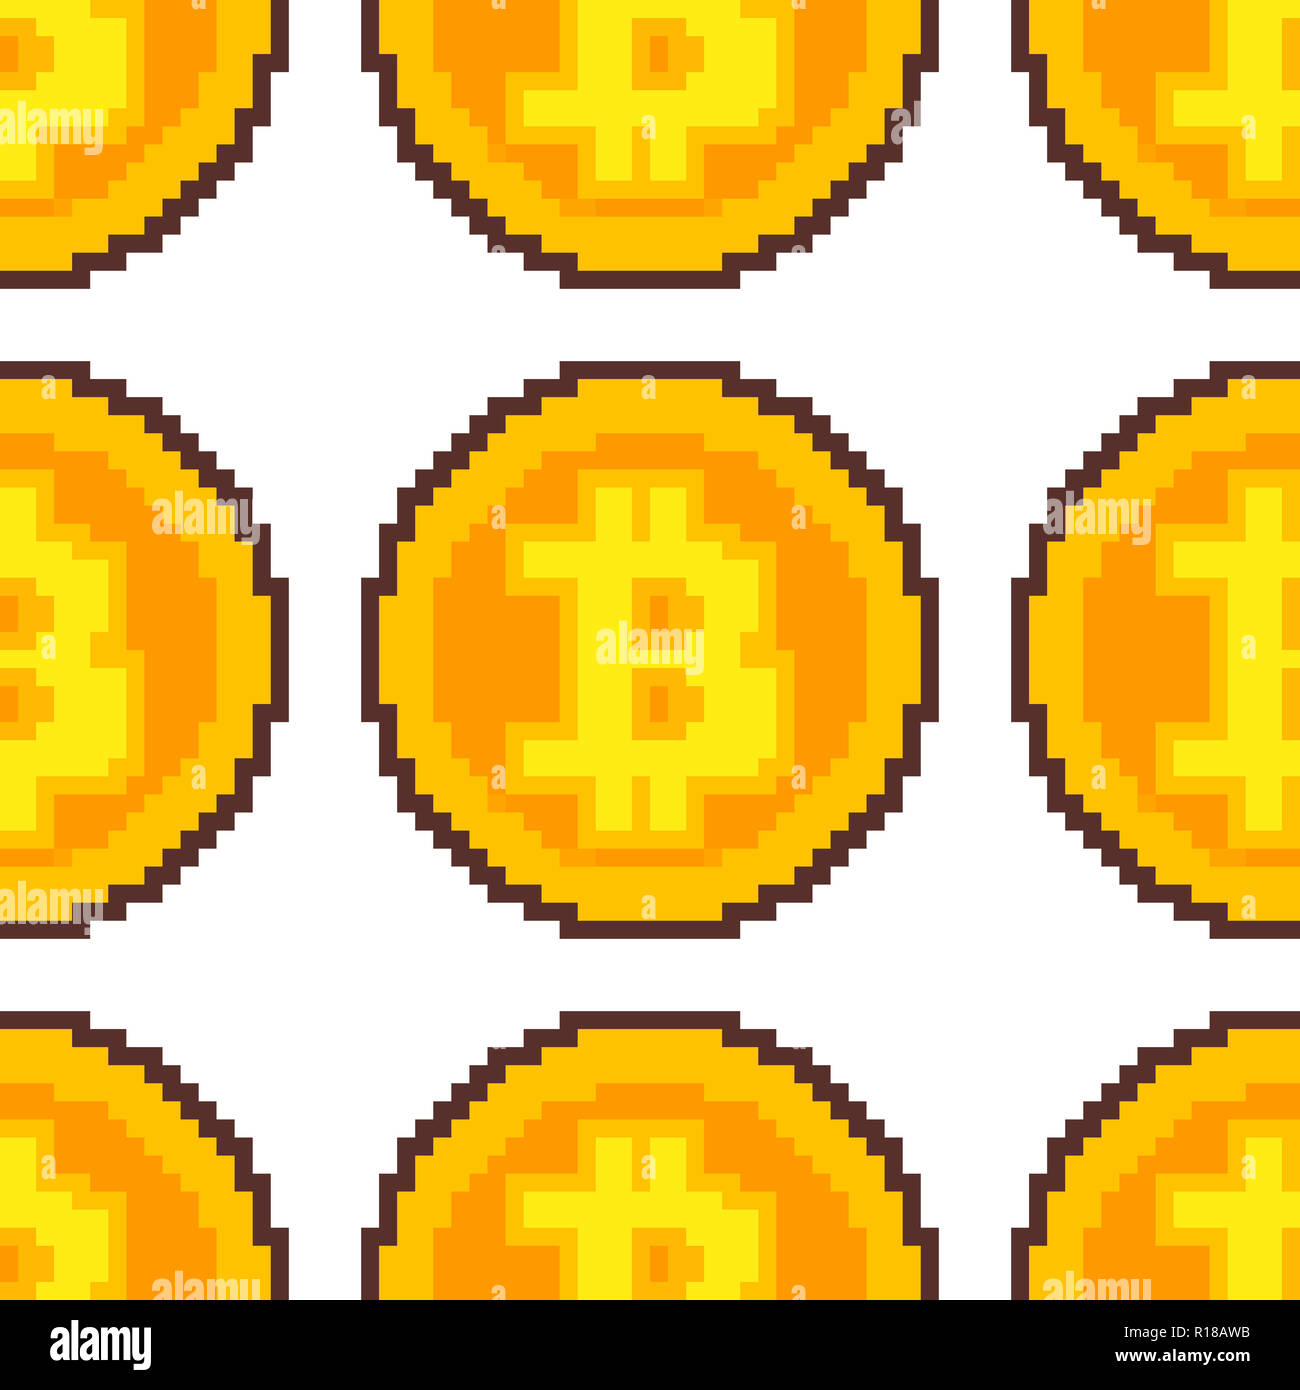 Pixel art repeatable seamless pattern: a golden physical bitcoin. Stock Photo